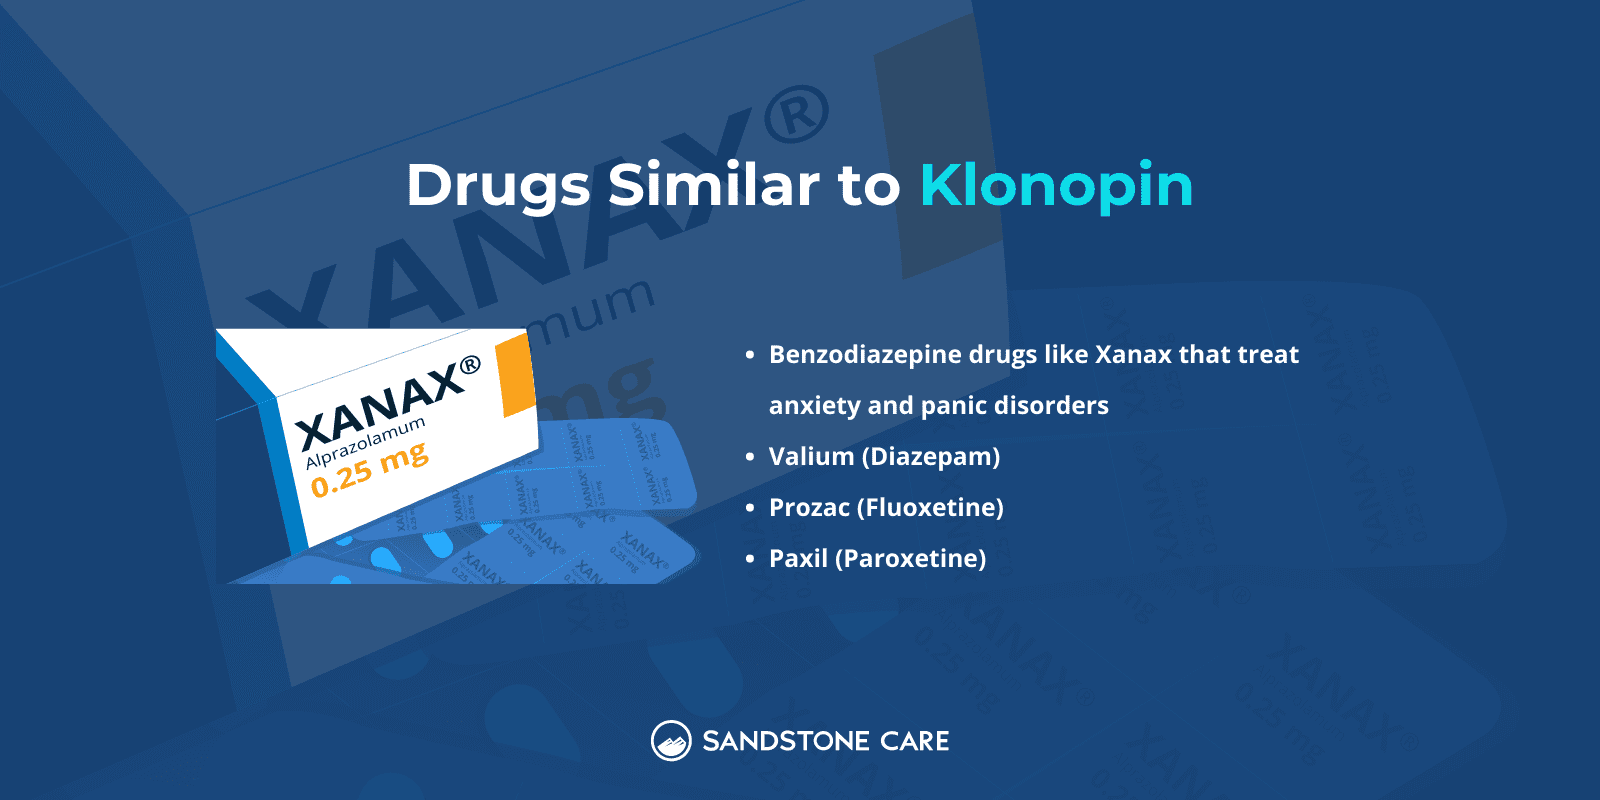 Drugs similar to klonopin infographic with Xanax digital illustration and lists of similar drugs to Klonopin